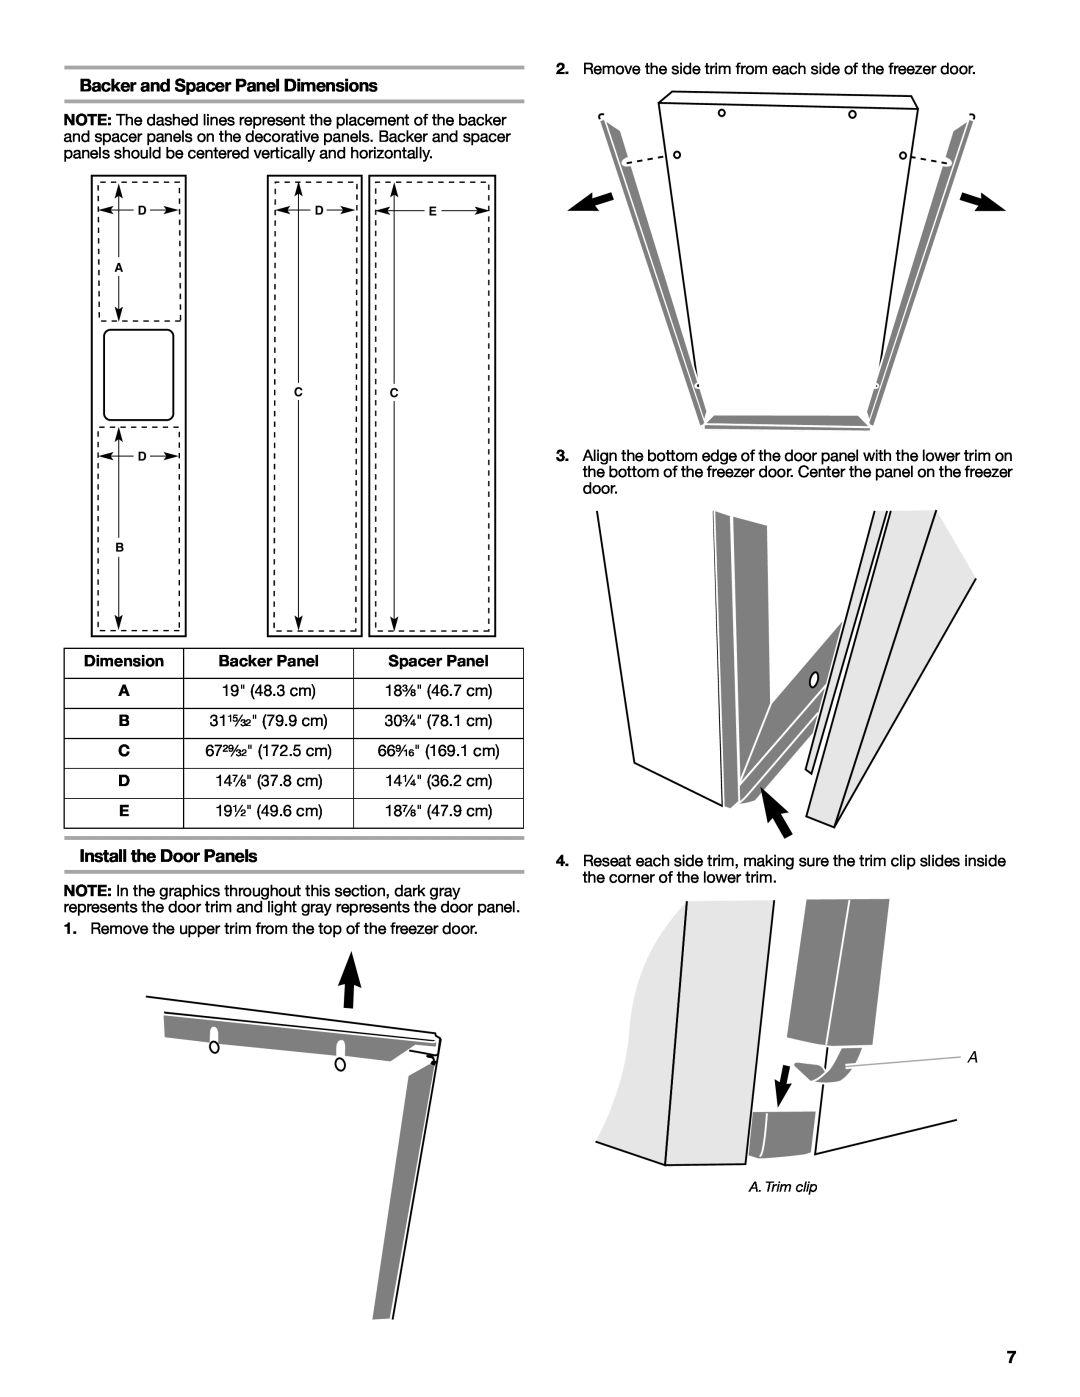 Whirlpool W10168334B installation instructions Backer and Spacer Panel Dimensions, Install the Door Panels, Backer Panel 